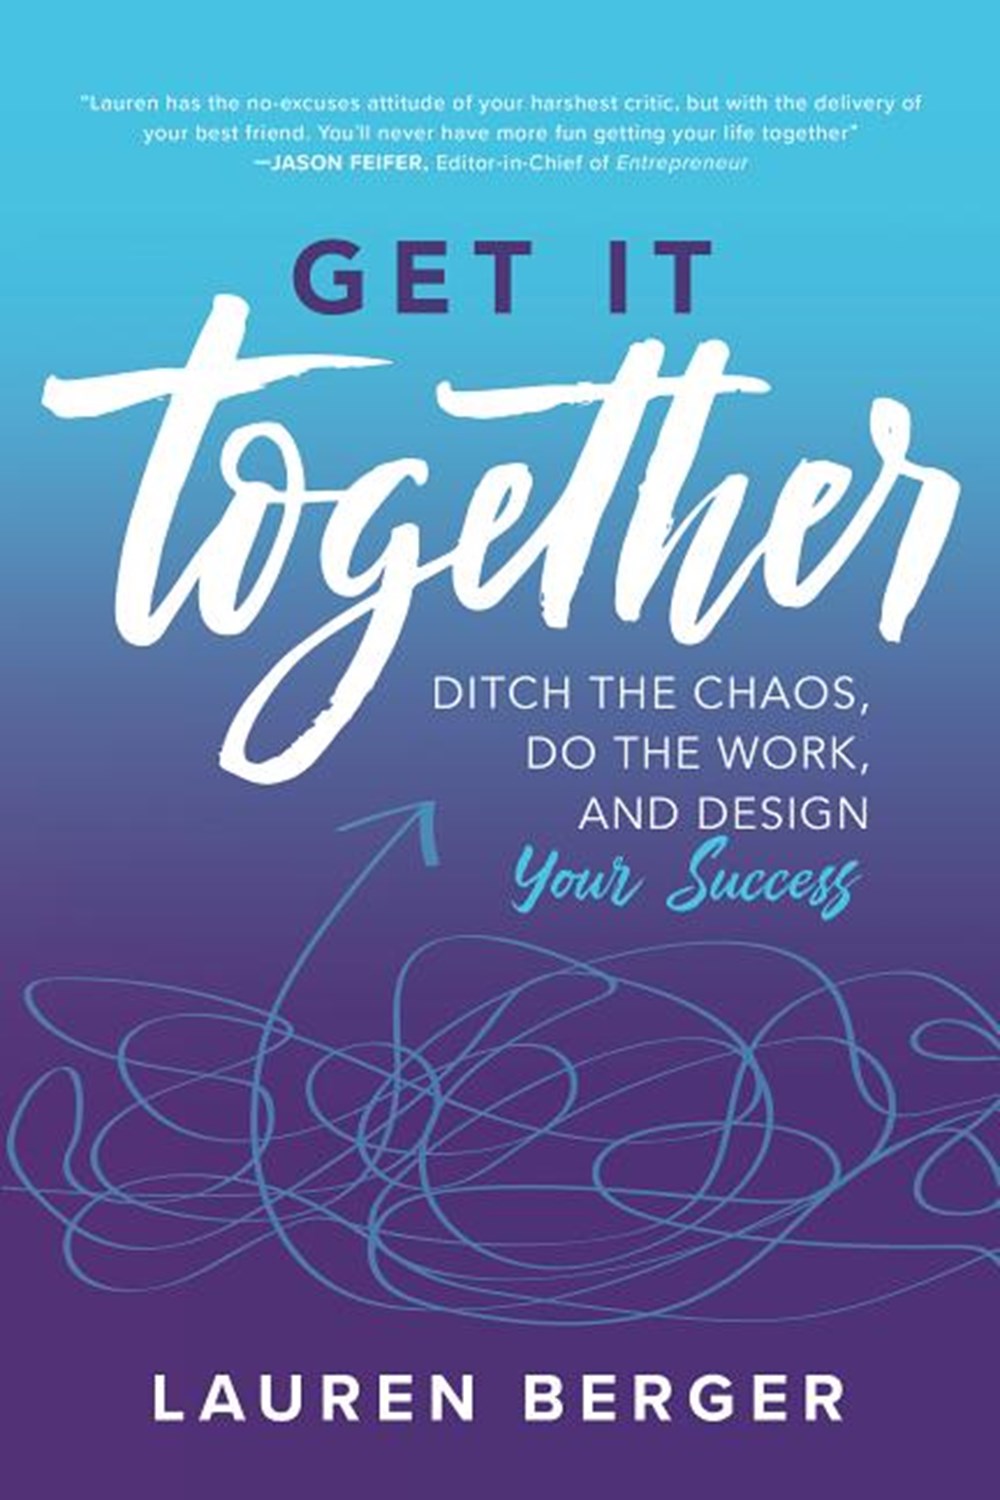 Get It Together Ditch the Chaos, Do the Work, and Design Your Success